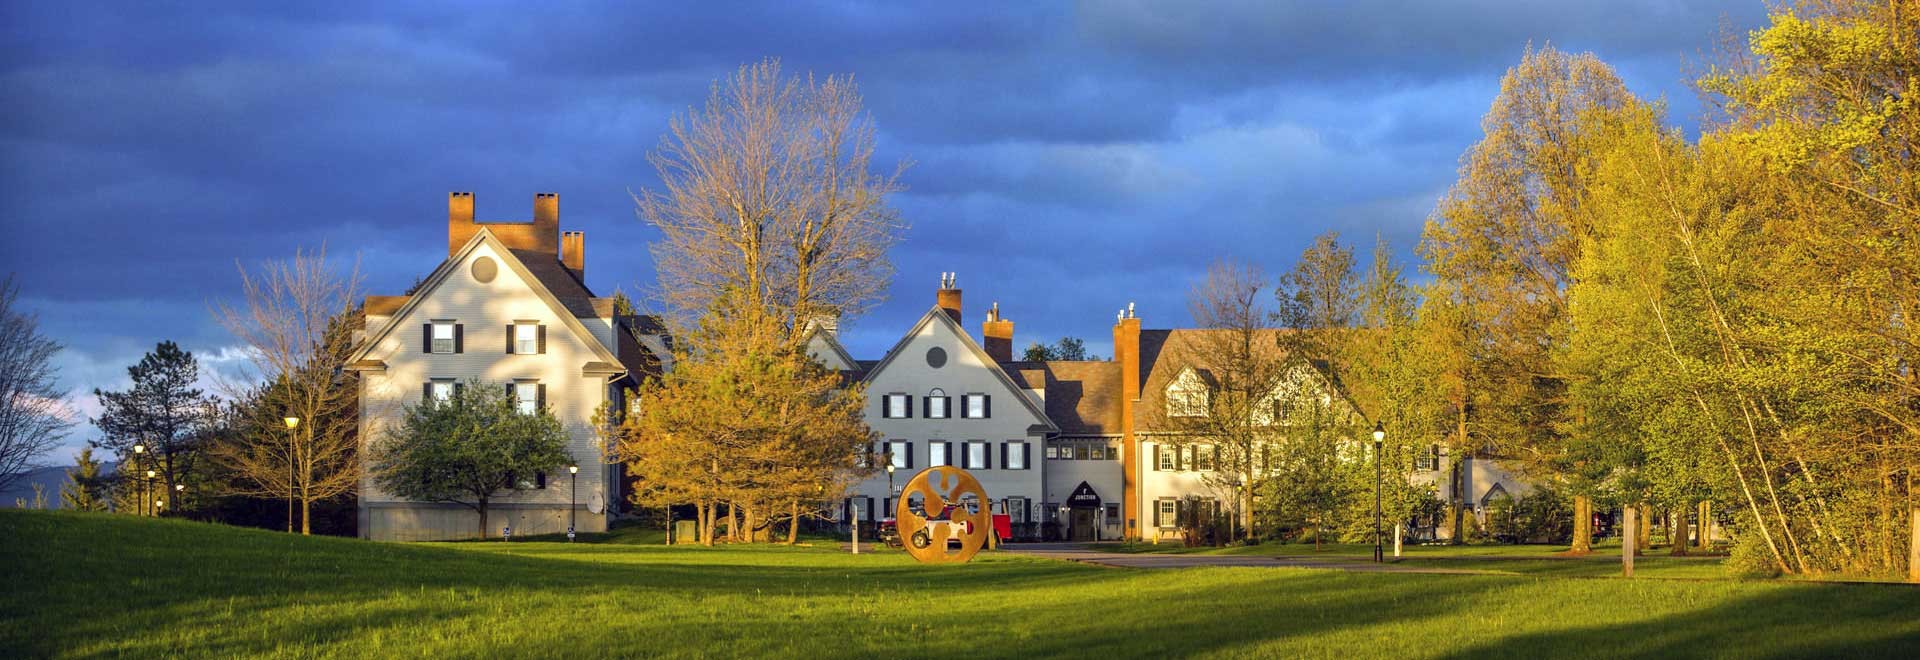 The Essex, Vermont's Culinary Resort & Spa - Book. Travel. Play.